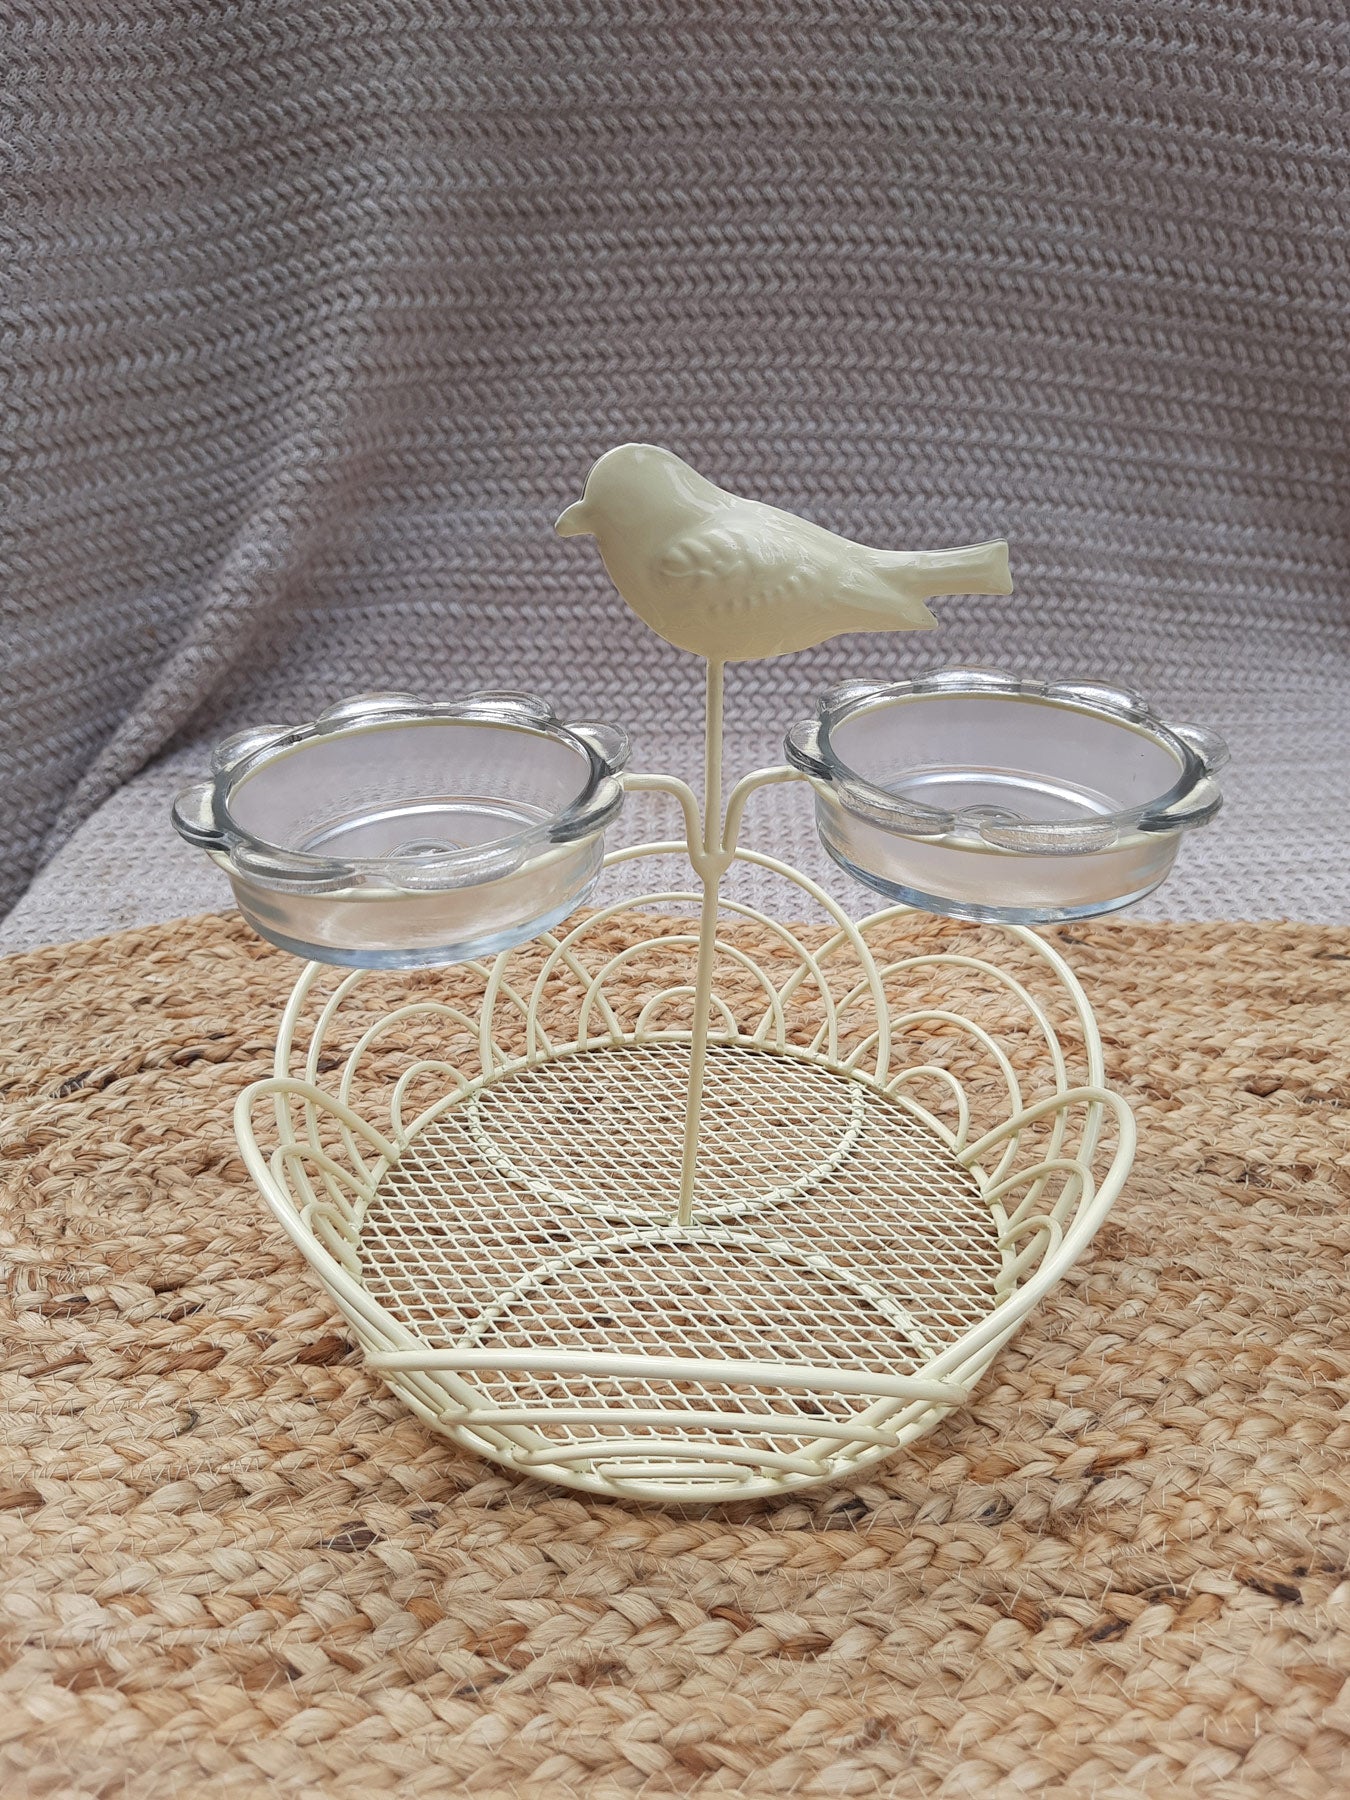 Snack Basket With Glass Bowls